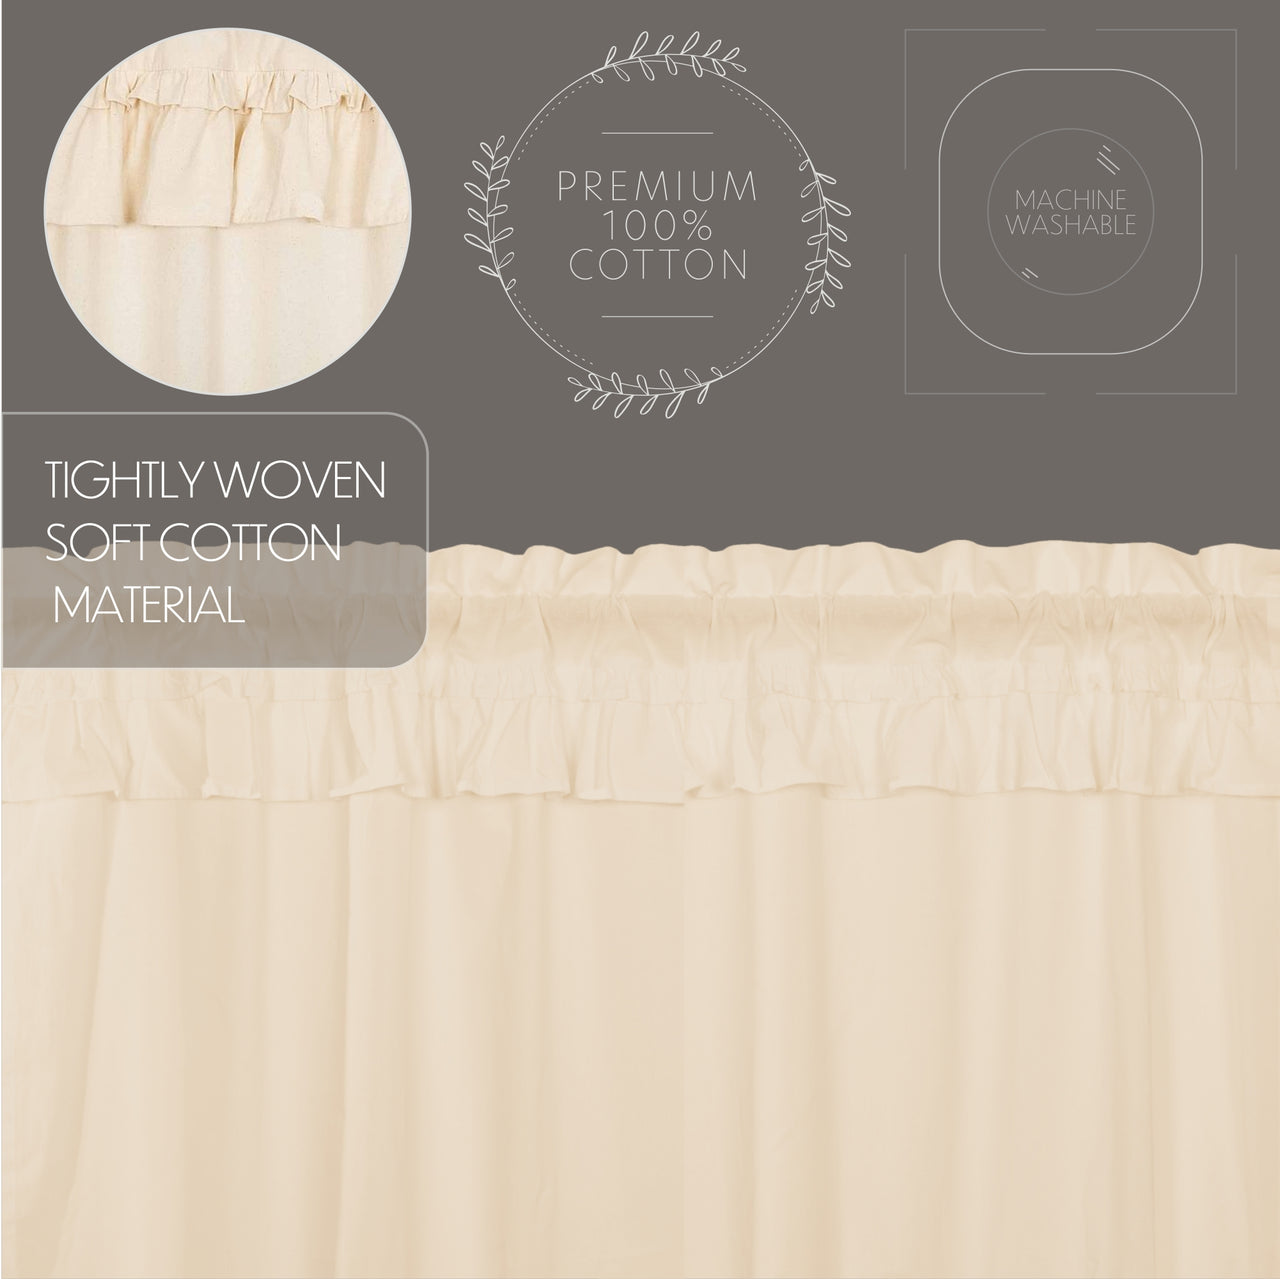 Muslin Ruffled Unbleached Natural Valance Curtain 16x60 VHC Brands